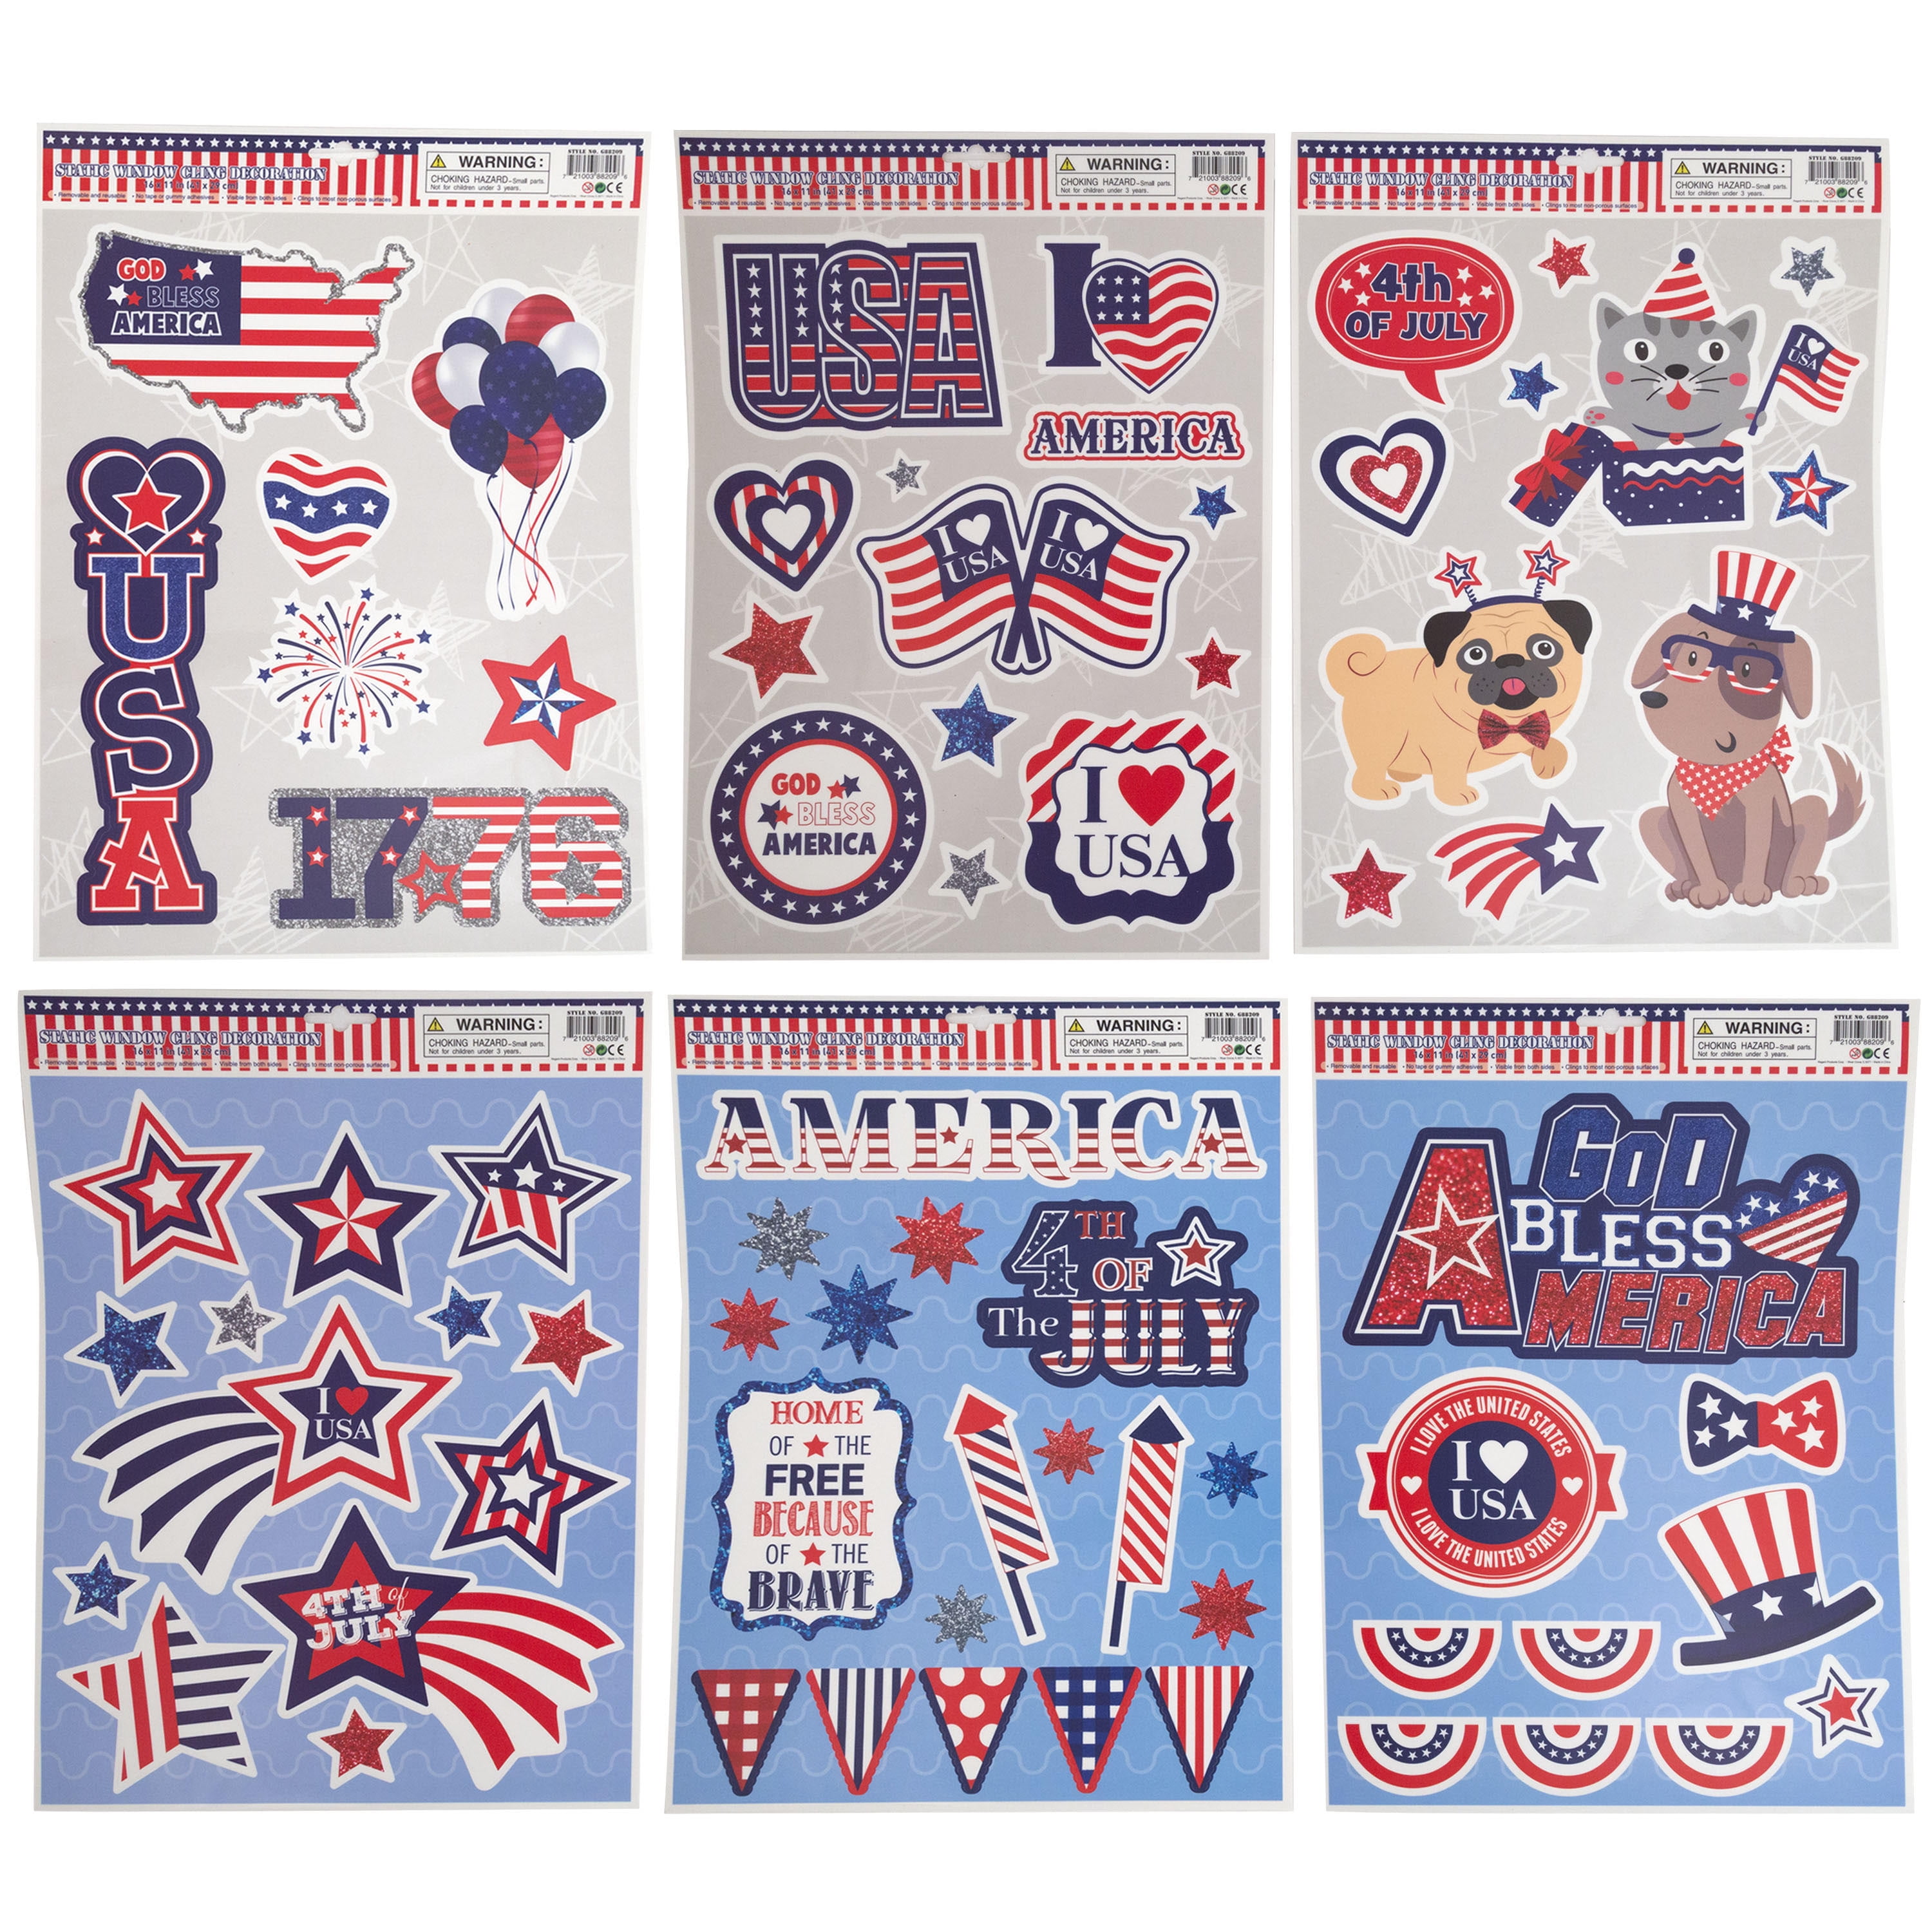 Election Support Our Troops Patriotic Set Patriotic Plum Nellies Treasures Patriotic Window Gel Cling Stickers Decor 4th of July 